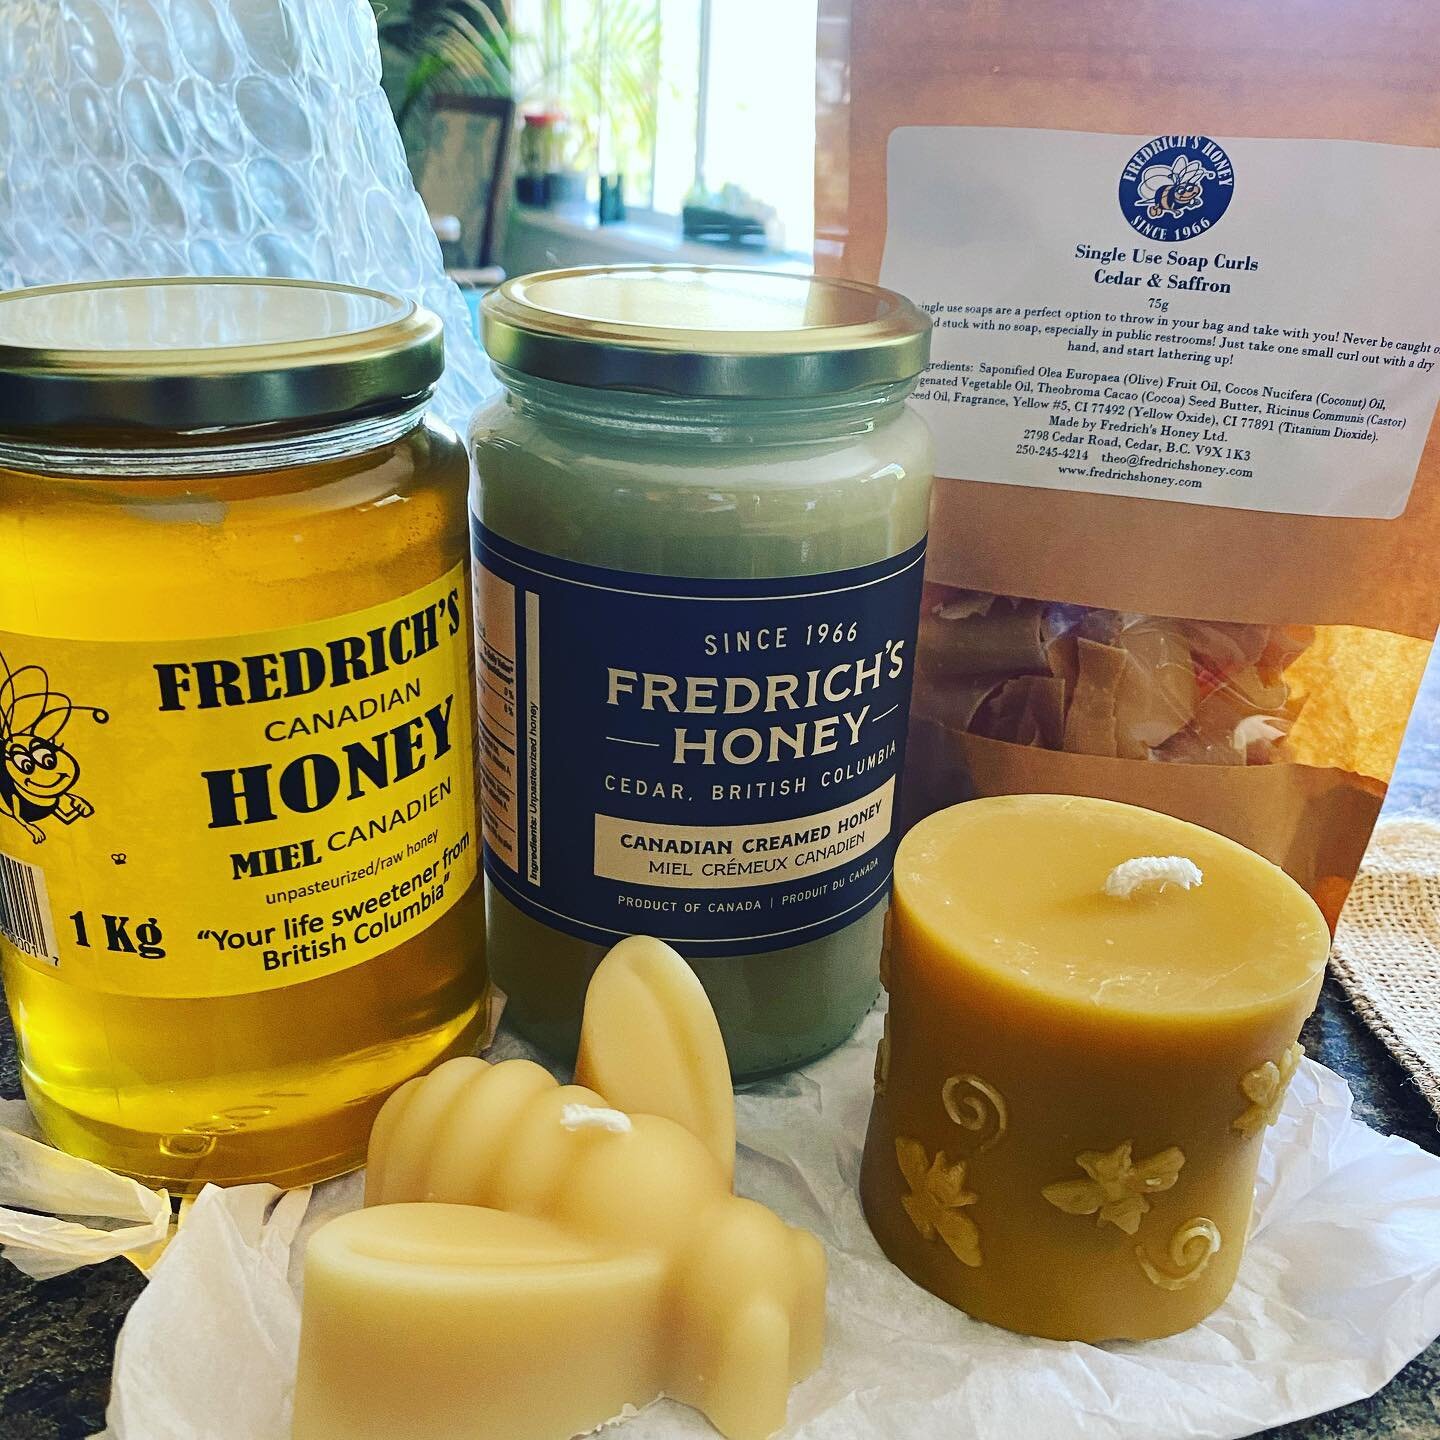 Farm friends! We are so thankful to Fredrich&rsquo;s Honey for bringing the bees for our Cranberry pollination. It&rsquo;s these partnerships/friendships in farming that keep things growing and blooming. Thank you very much Fredrich&rsquo;s family fo